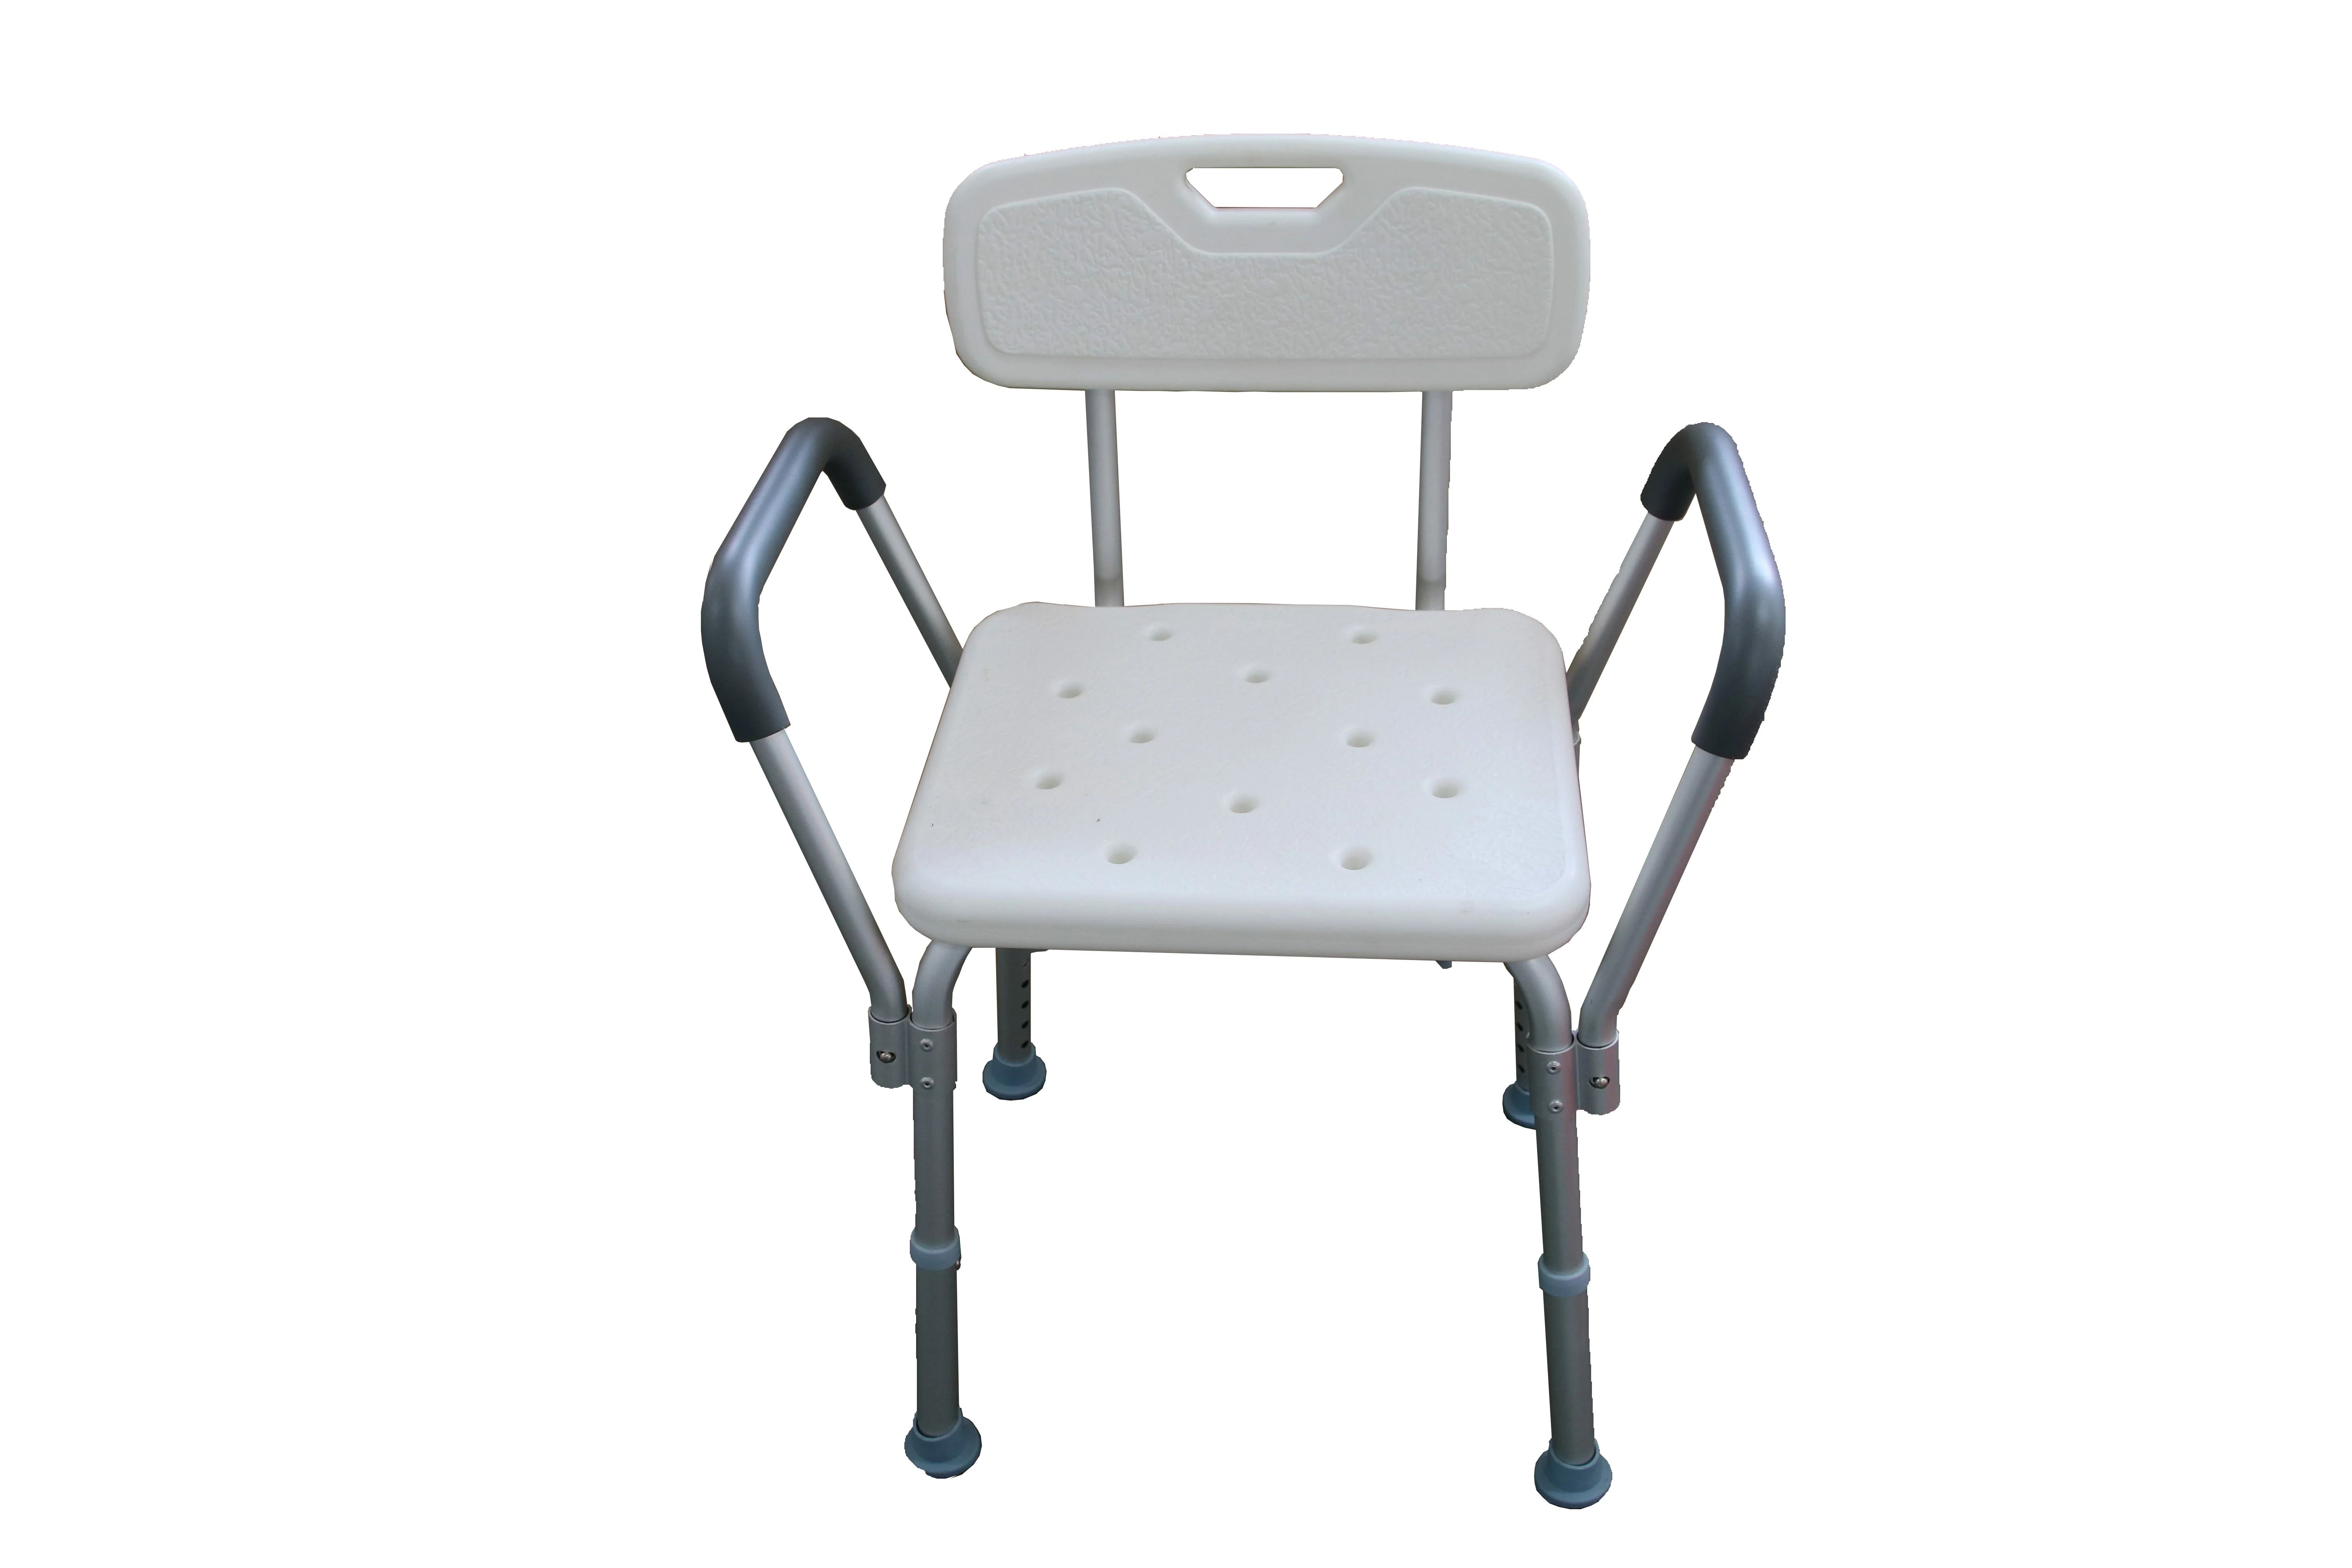 cheap disabled elderly Aluminum shower stool /bath chair/ shower seats and stools with back and arms